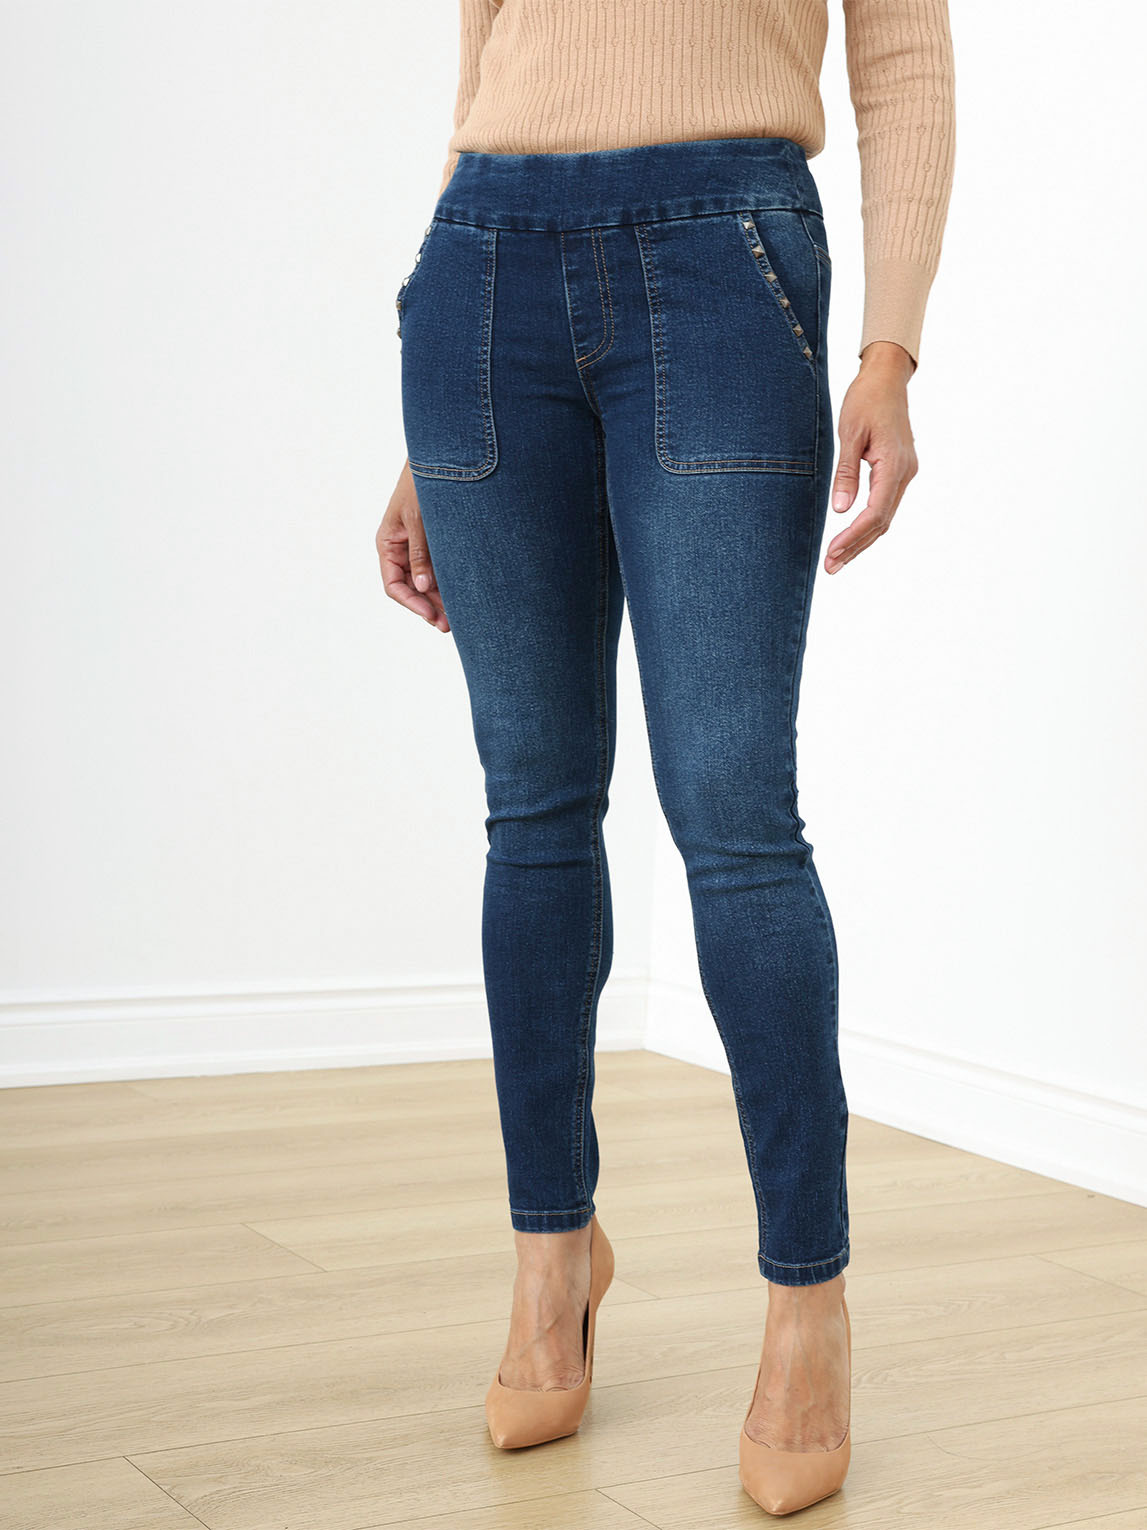 Medium Wash Slim Leg Jeans with Studs by GG Jeans, Cleo